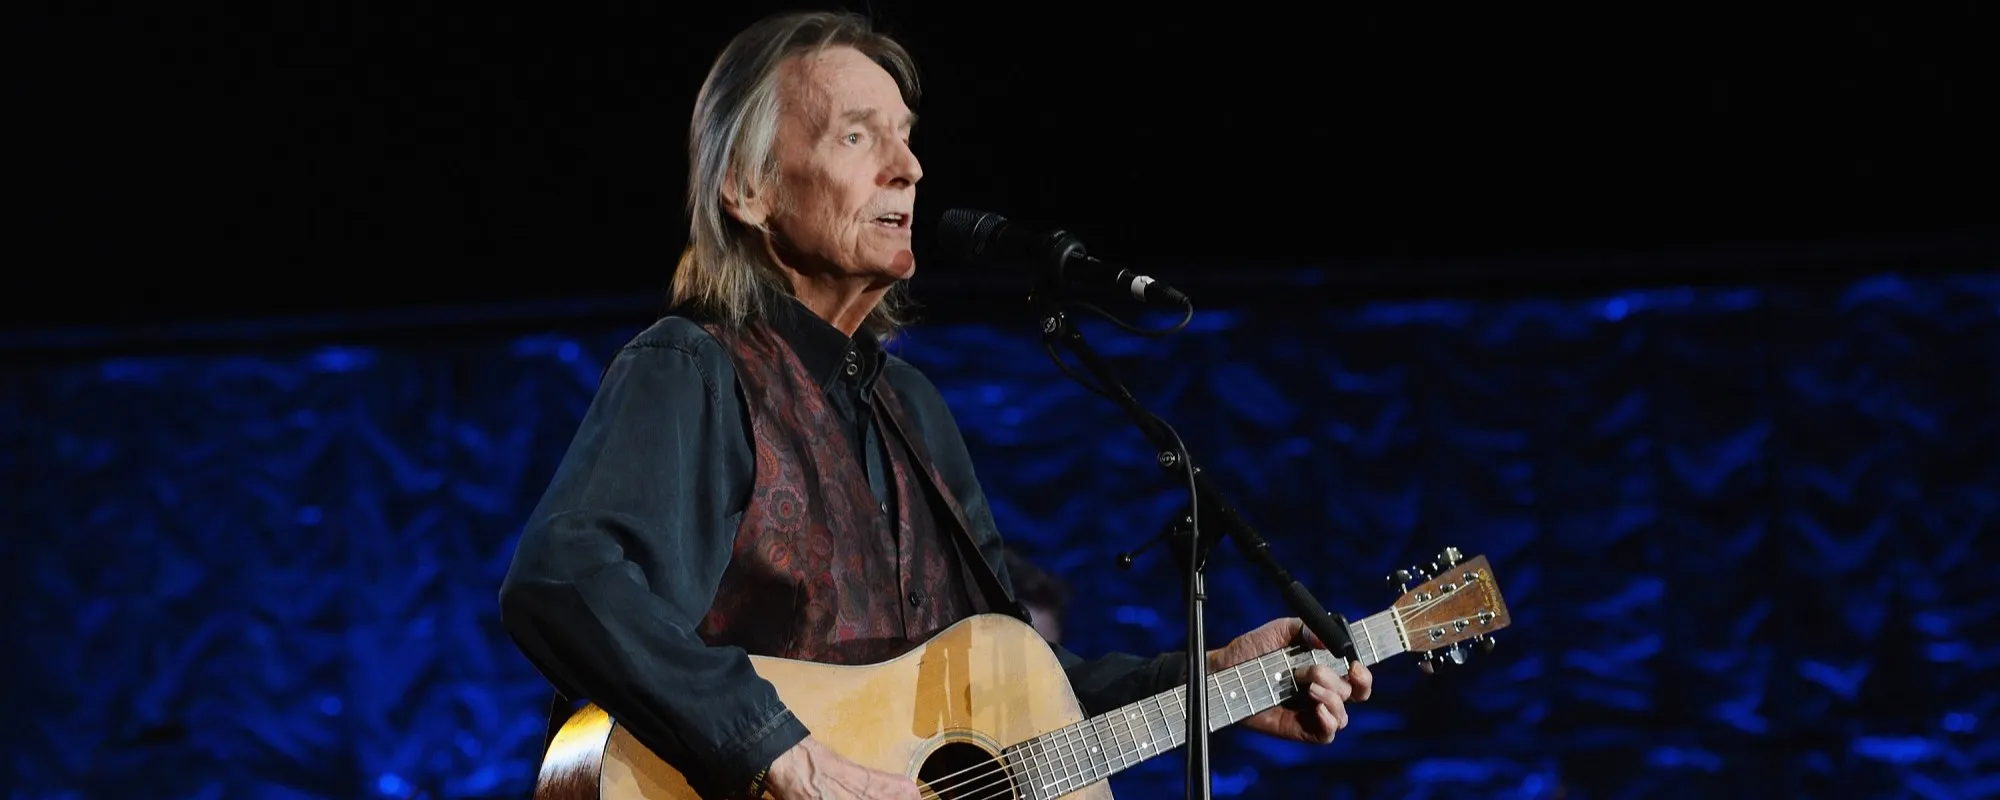 5 Cool Gordon Lightfoot Covers in Commemoration of the Late Canadian Folk Legend